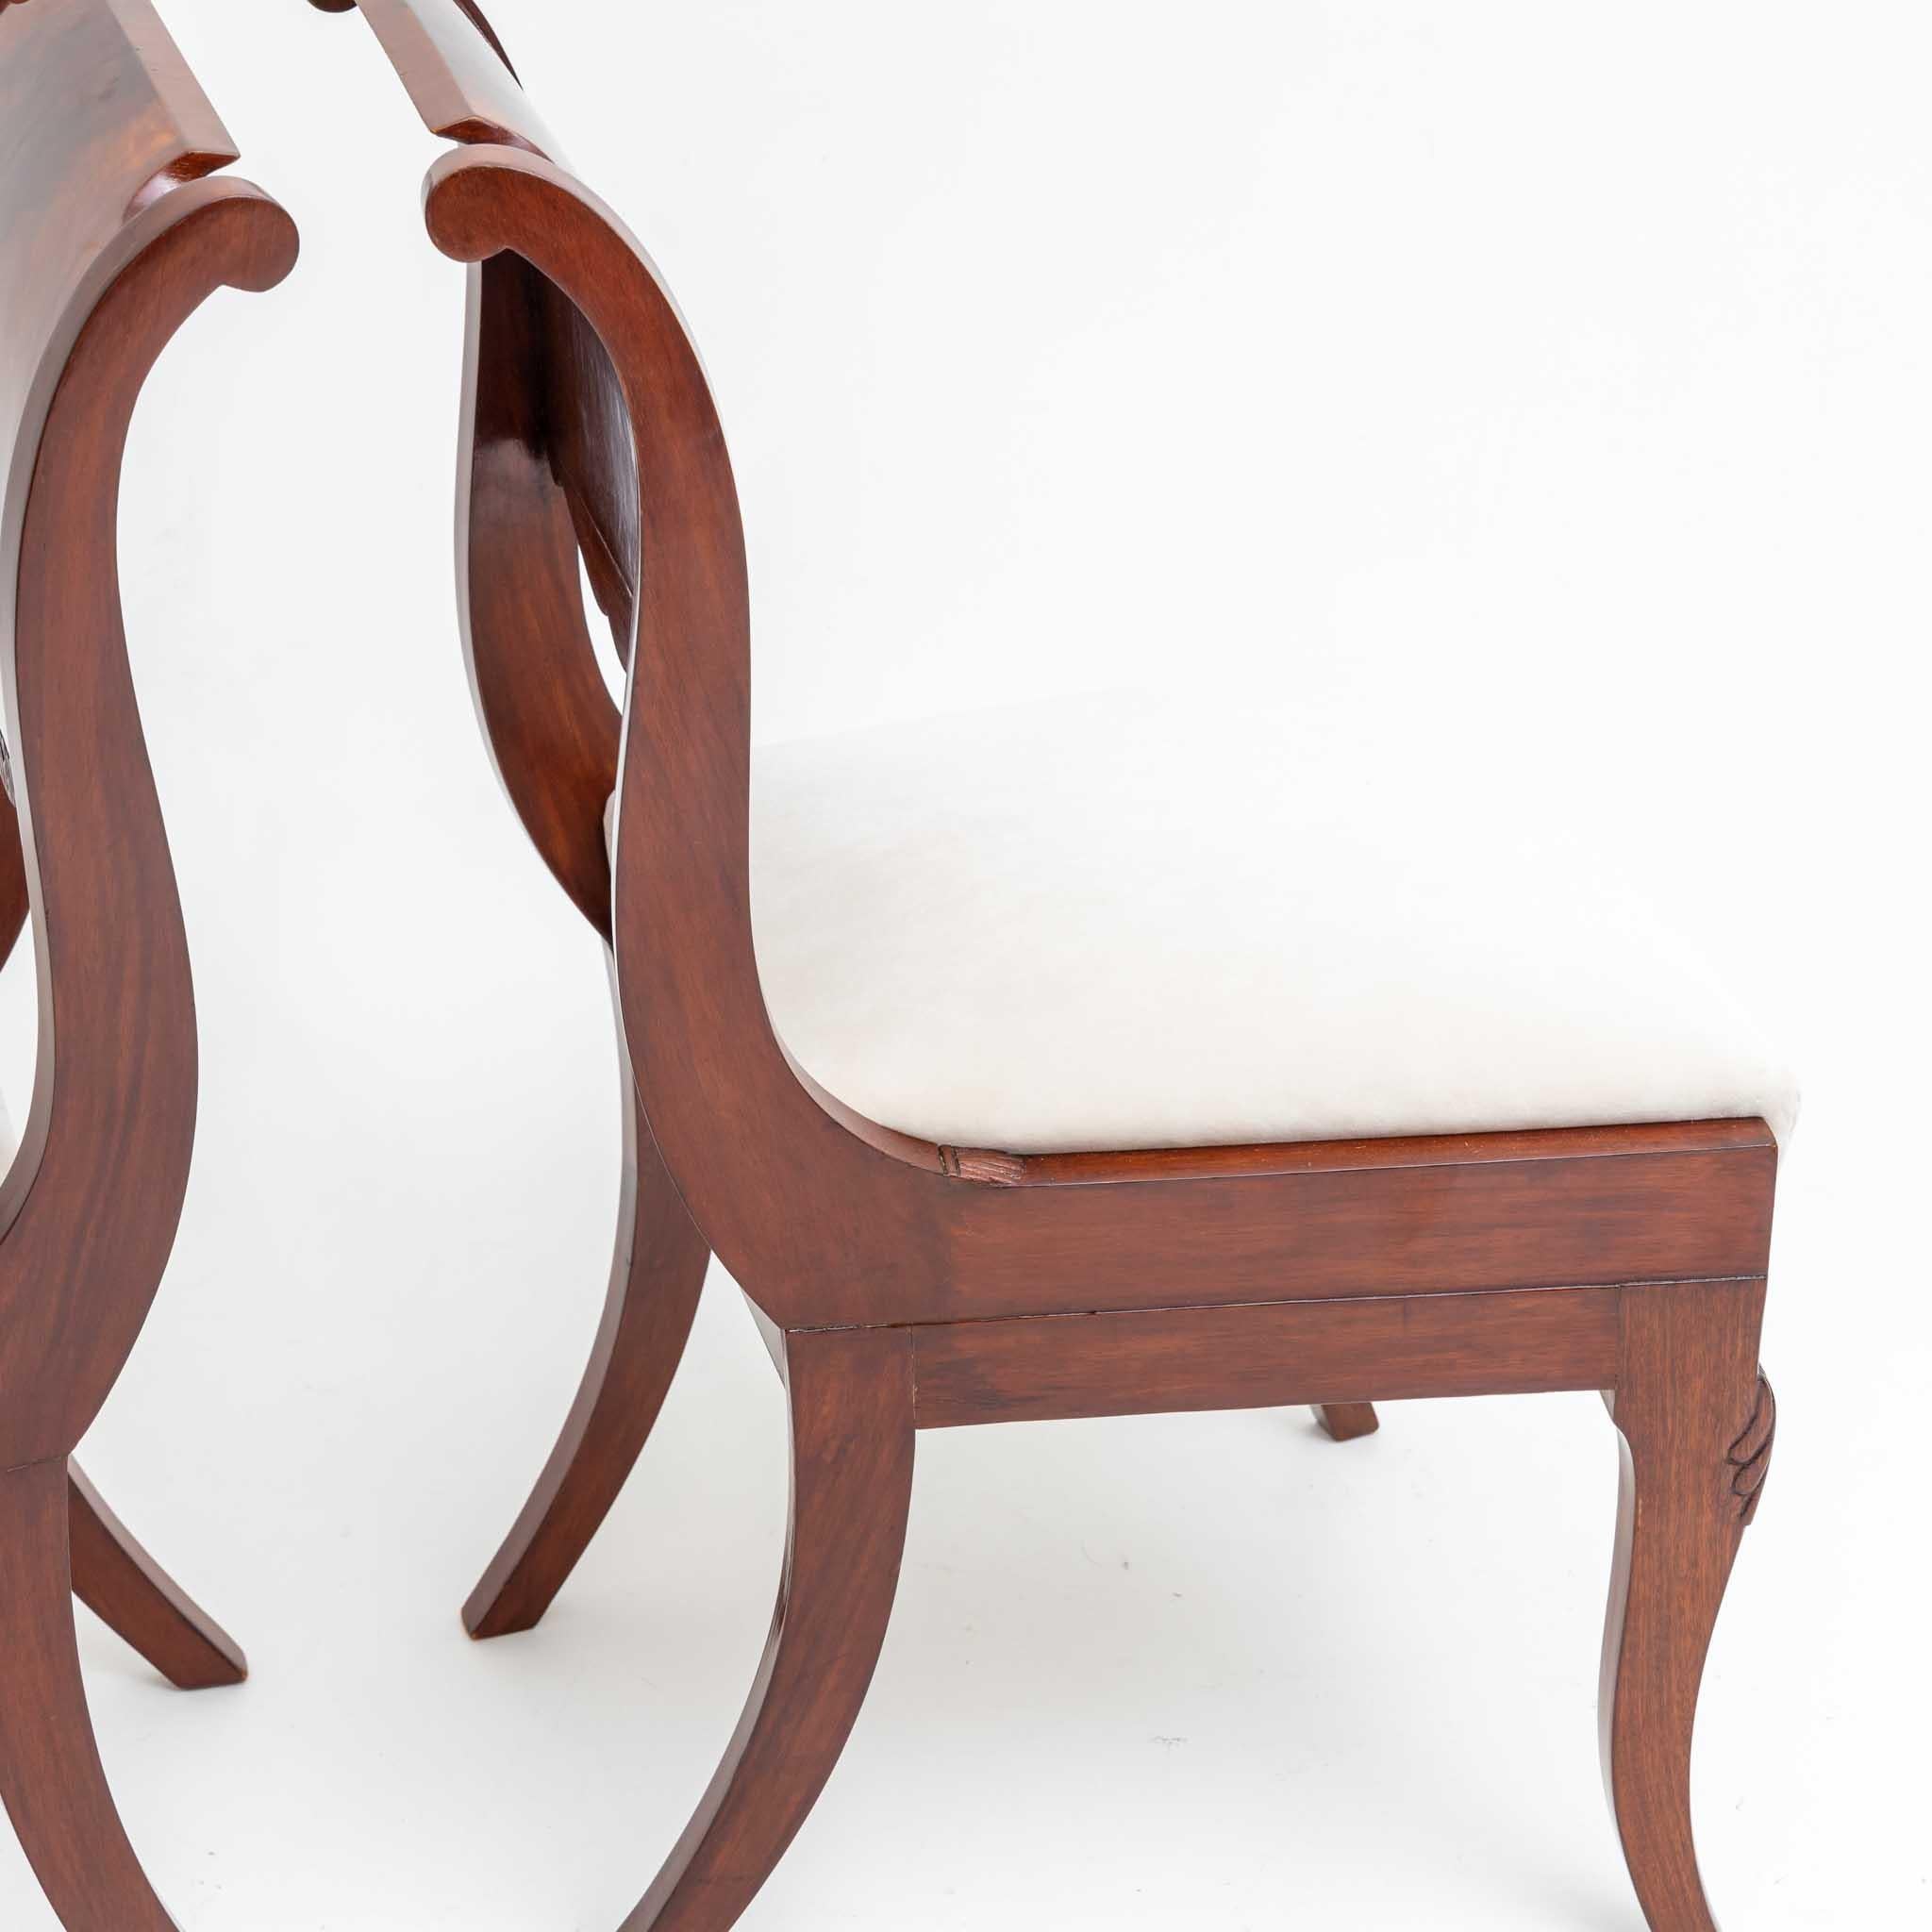 Wood Pair of Chairs, Baltic States, Around 1830 For Sale